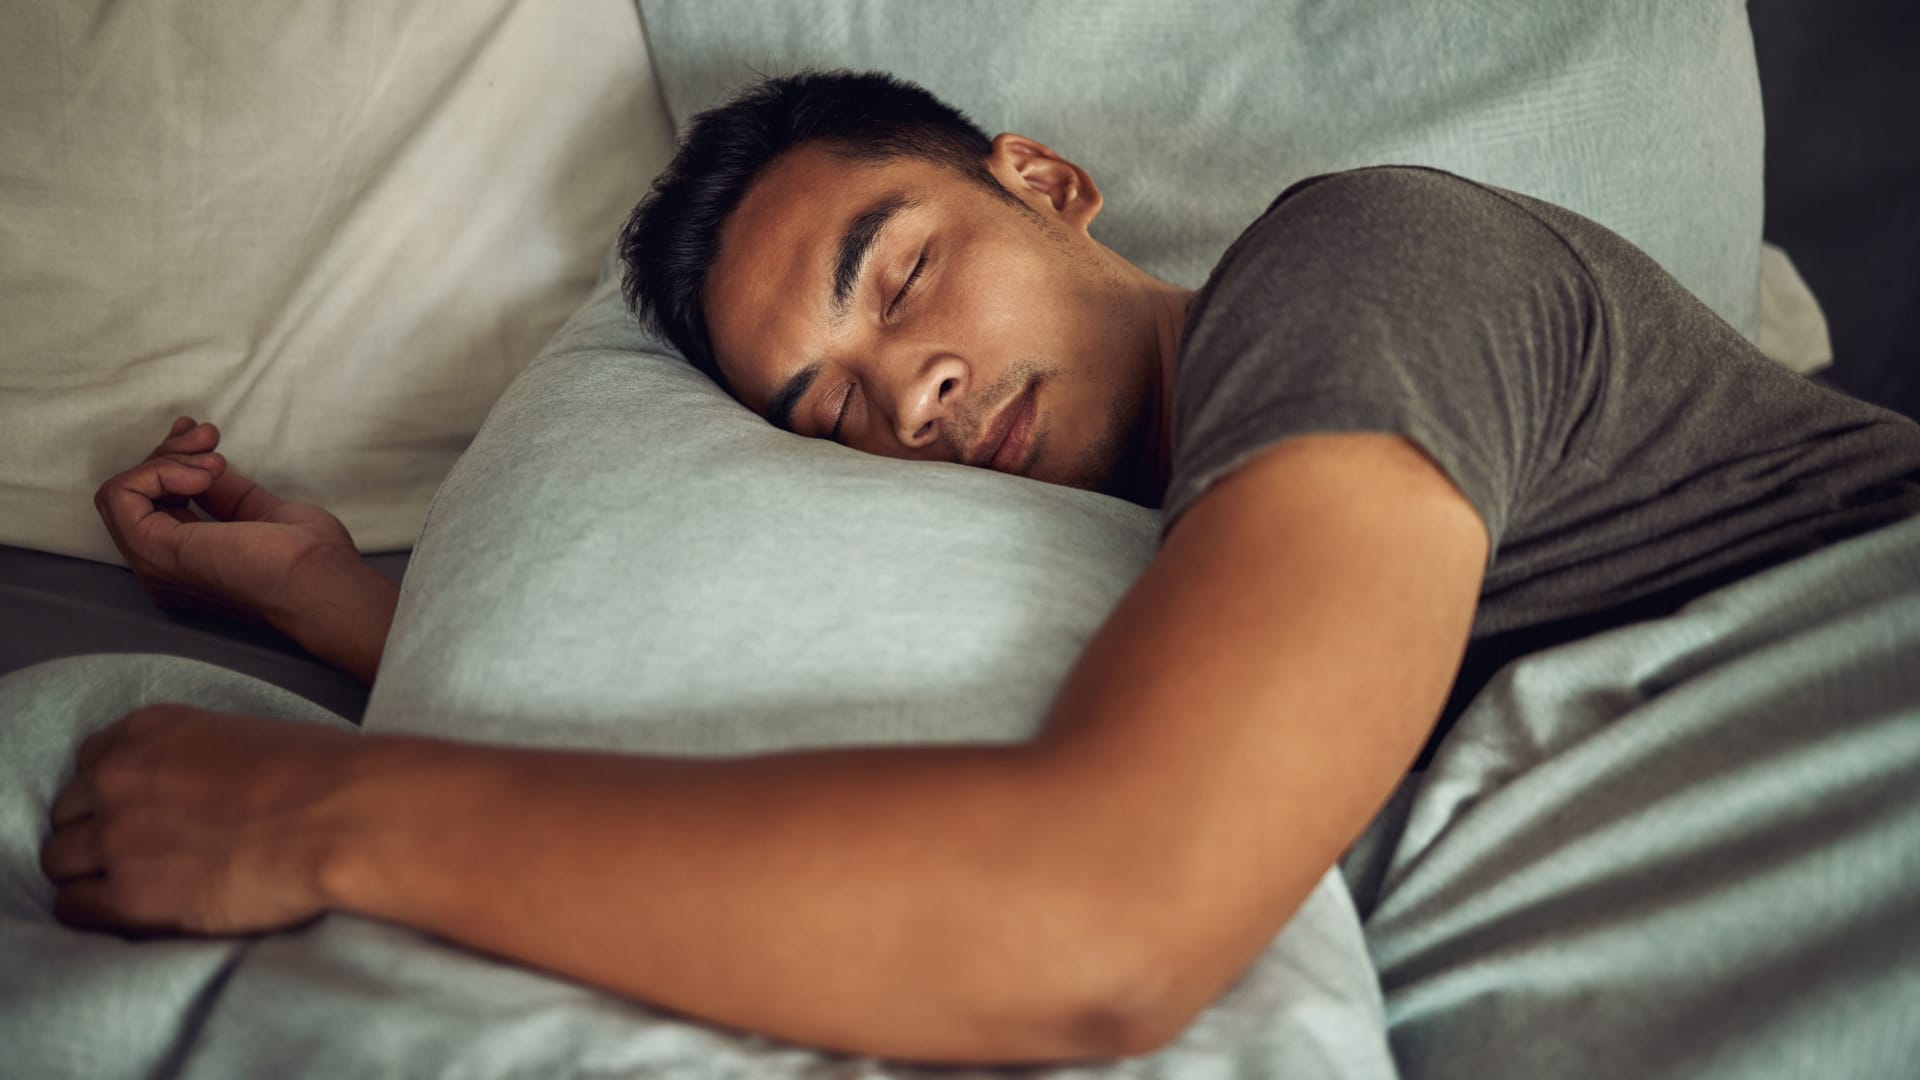 New Research: A Good Night's Rest Is Vital for Heart Health